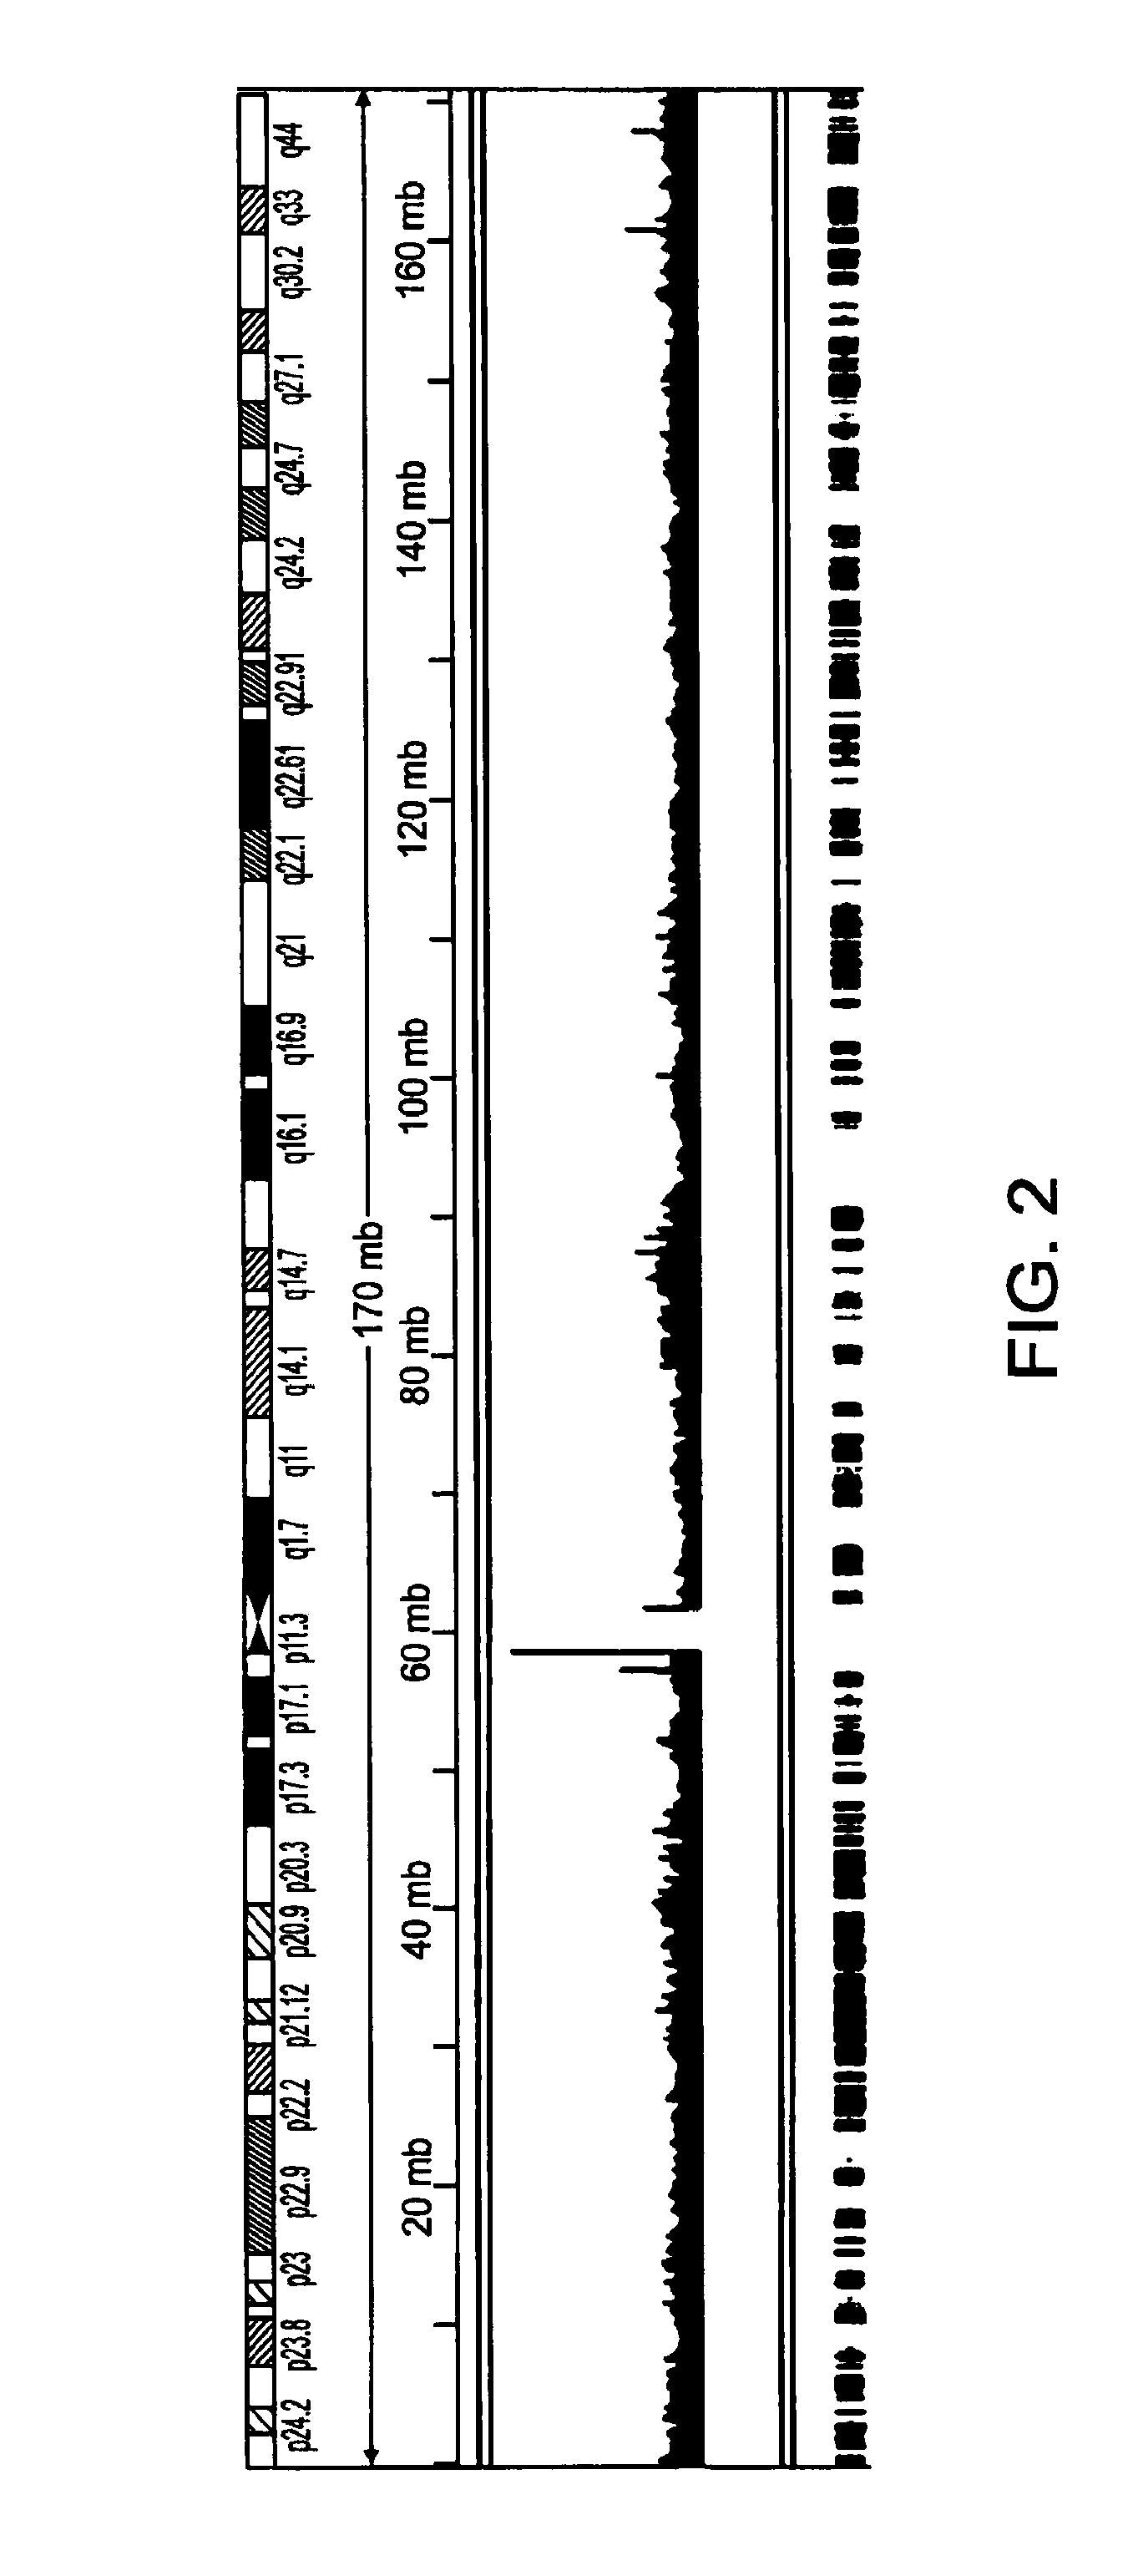 Methods of Amplifying Whole Genome of a Single Cell